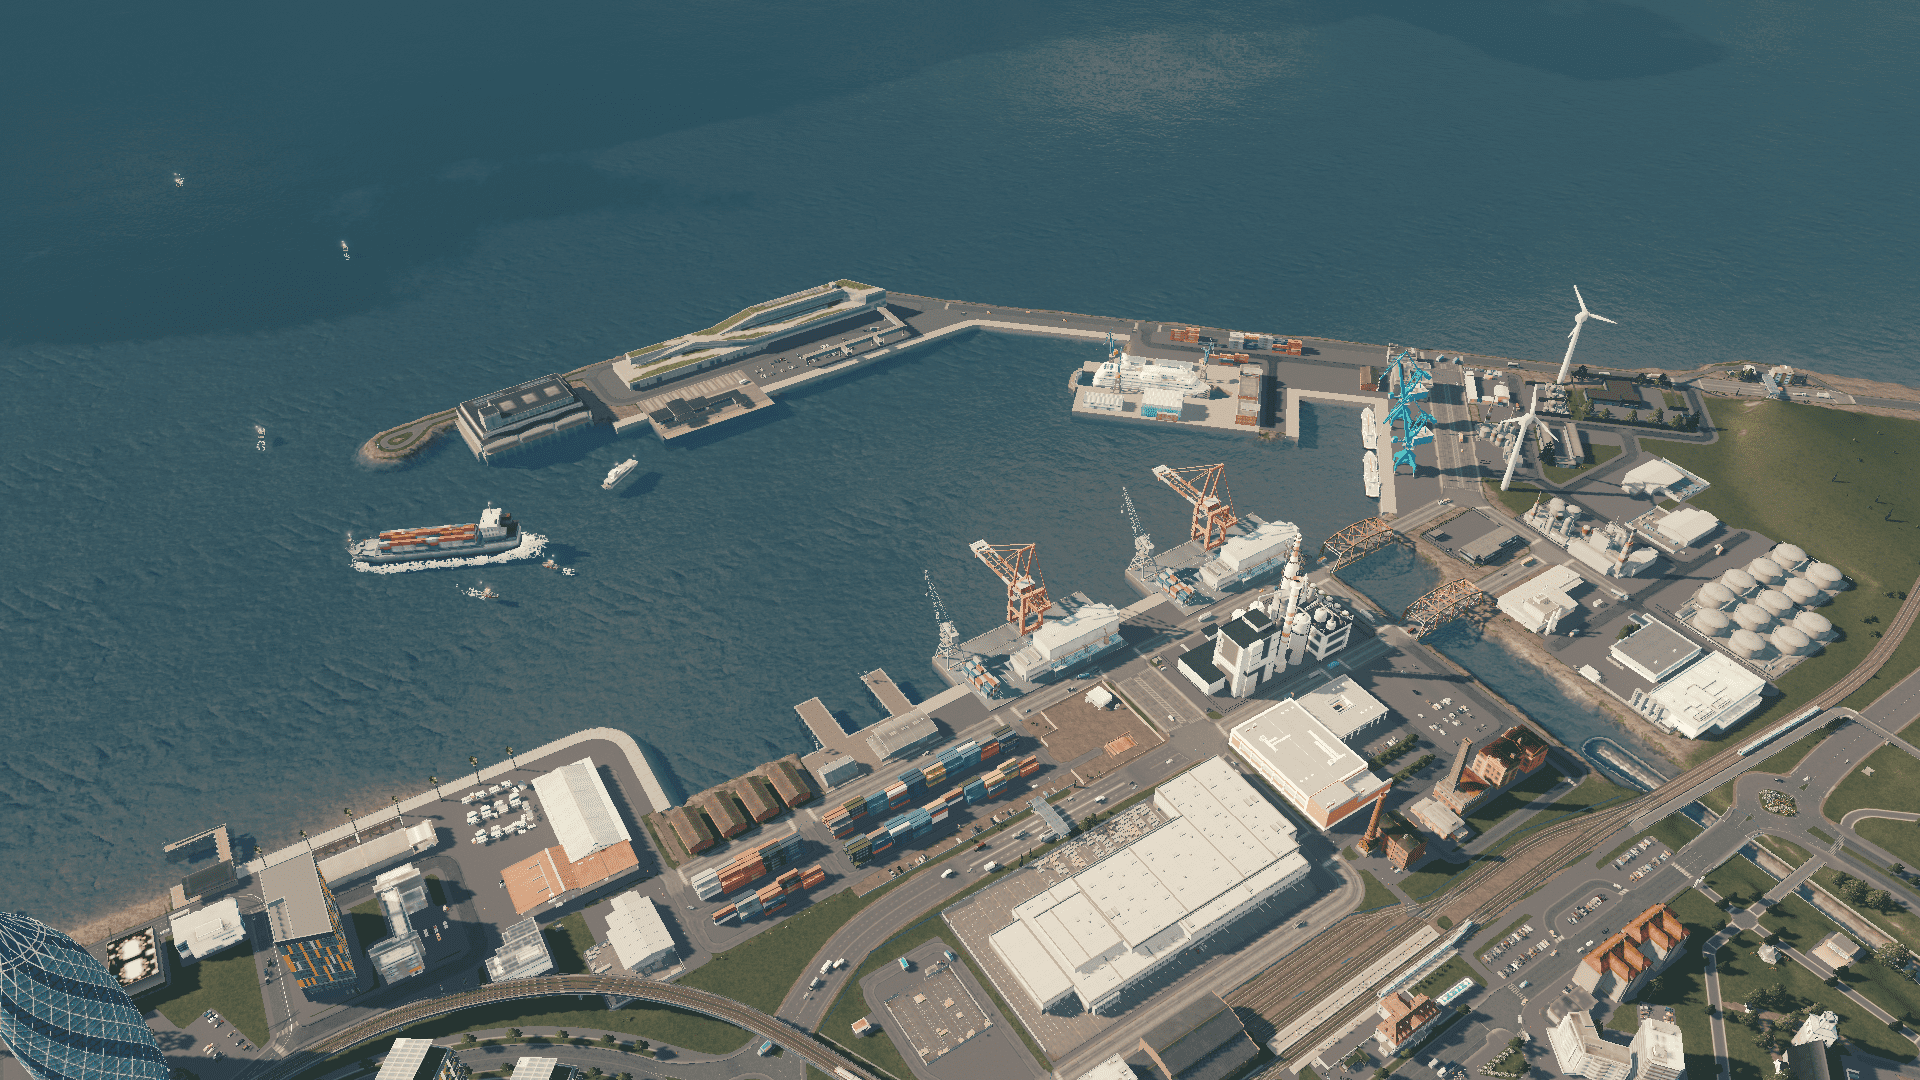 The port of Saint Martin (3rd iteration)